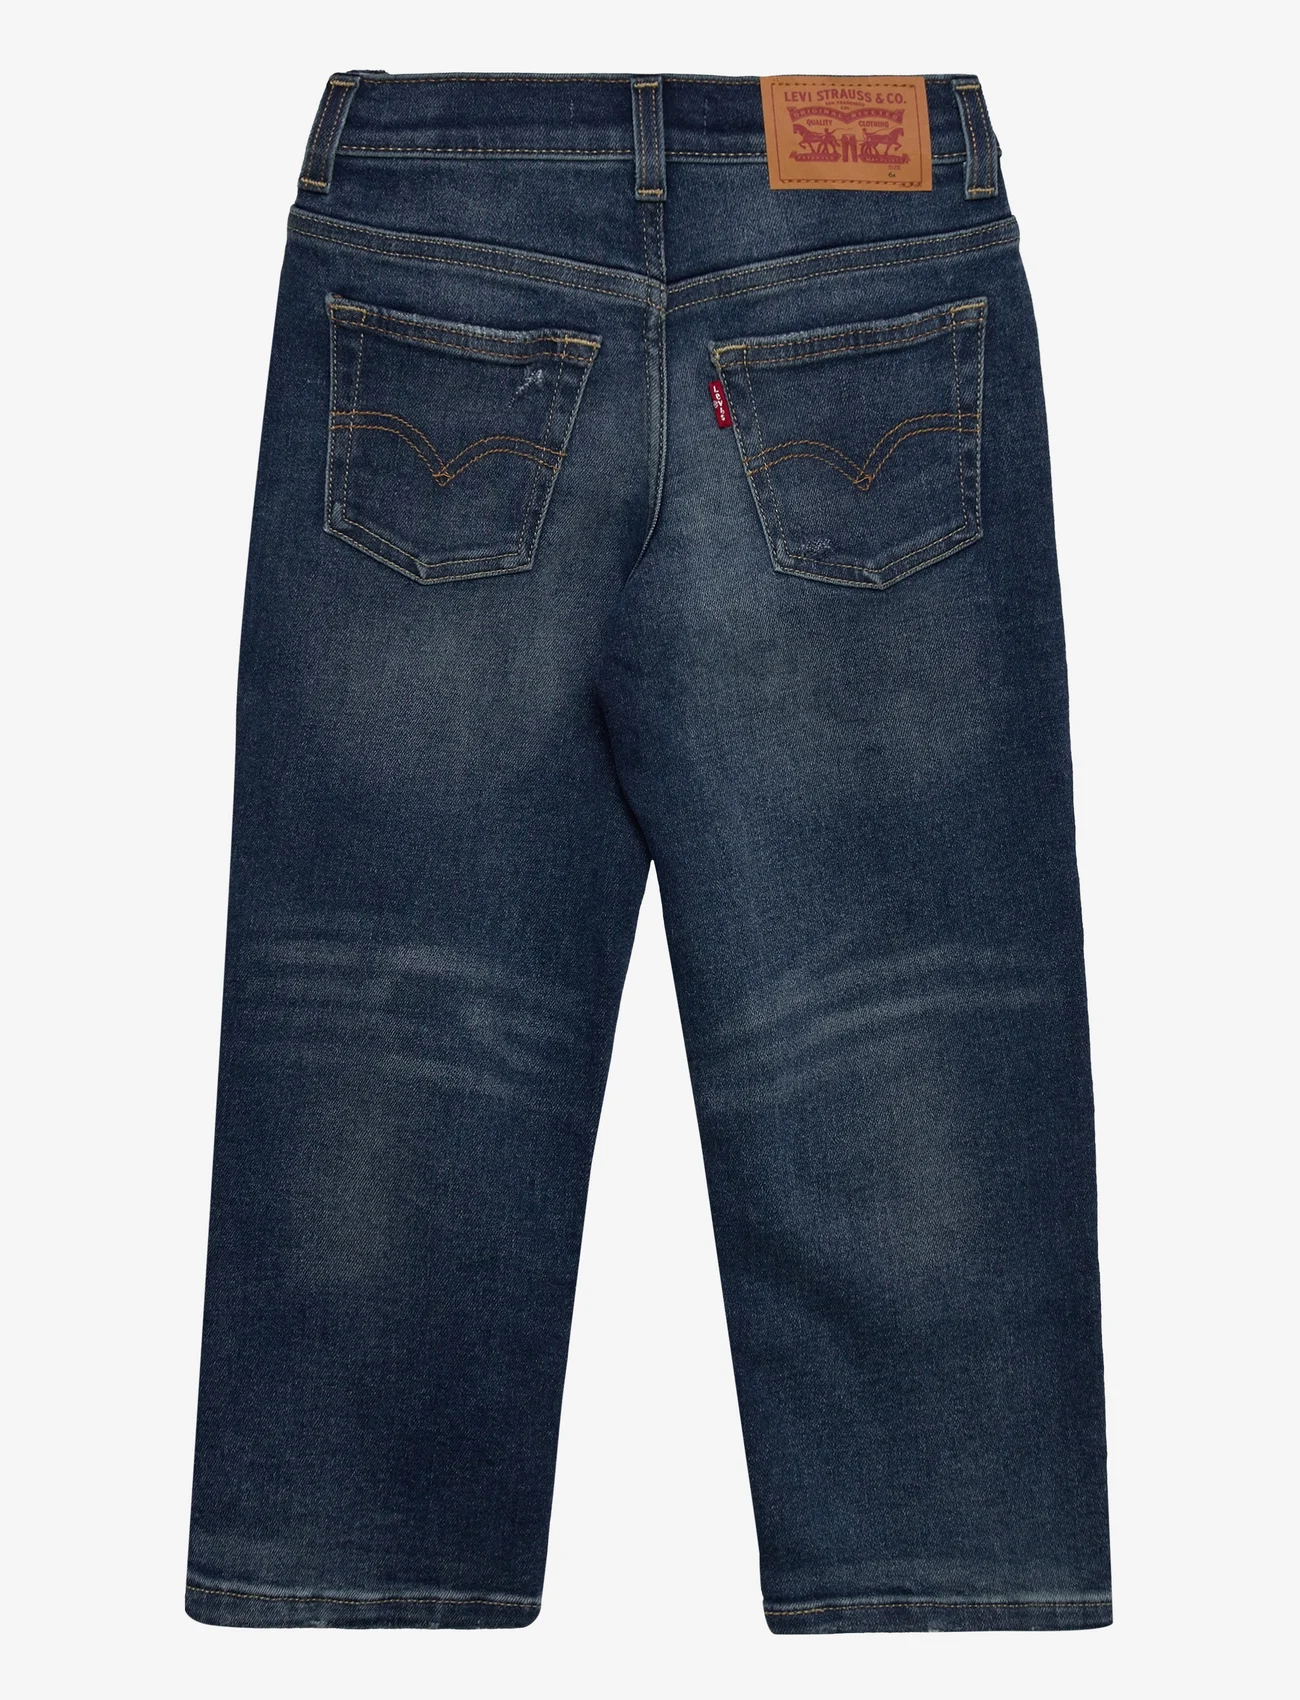 Levi's - Levi's® Stay Loose Tapered Fit Jeans - hosen mit weitem bein - blue - 1